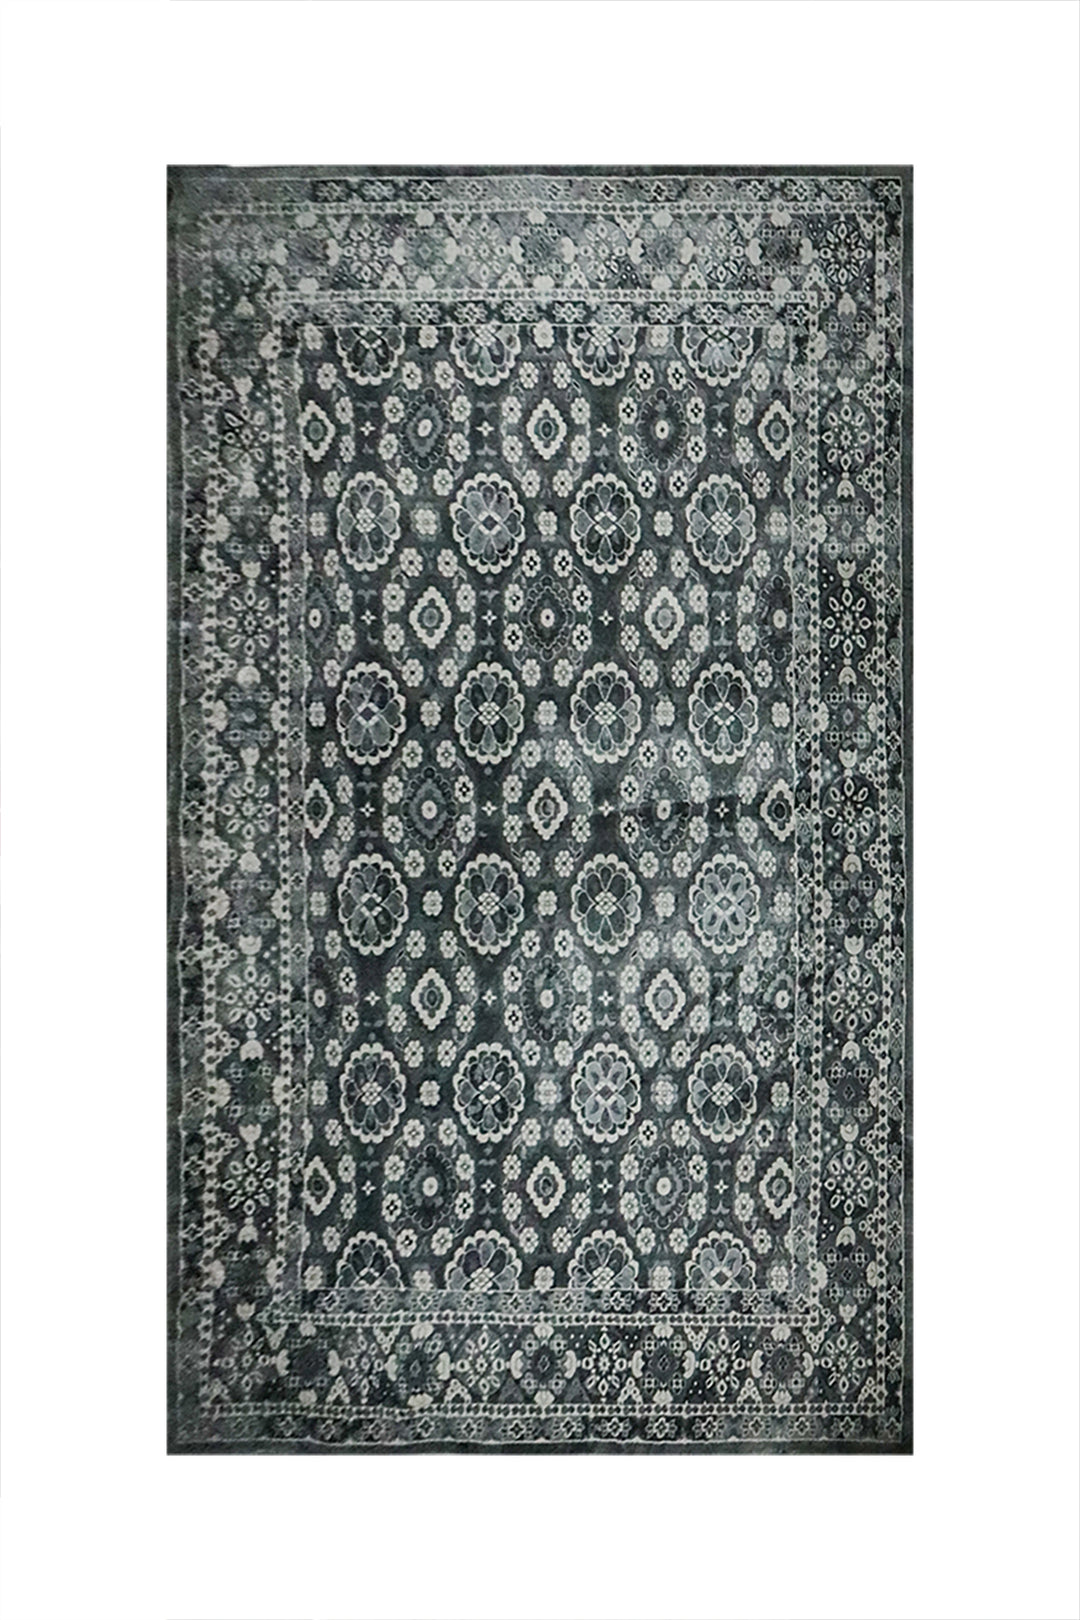 Turkish Modern Festival WD Rug - 7.8 x 10.2 FT - Gray - Sleek and Minimalist for Chic Interiors